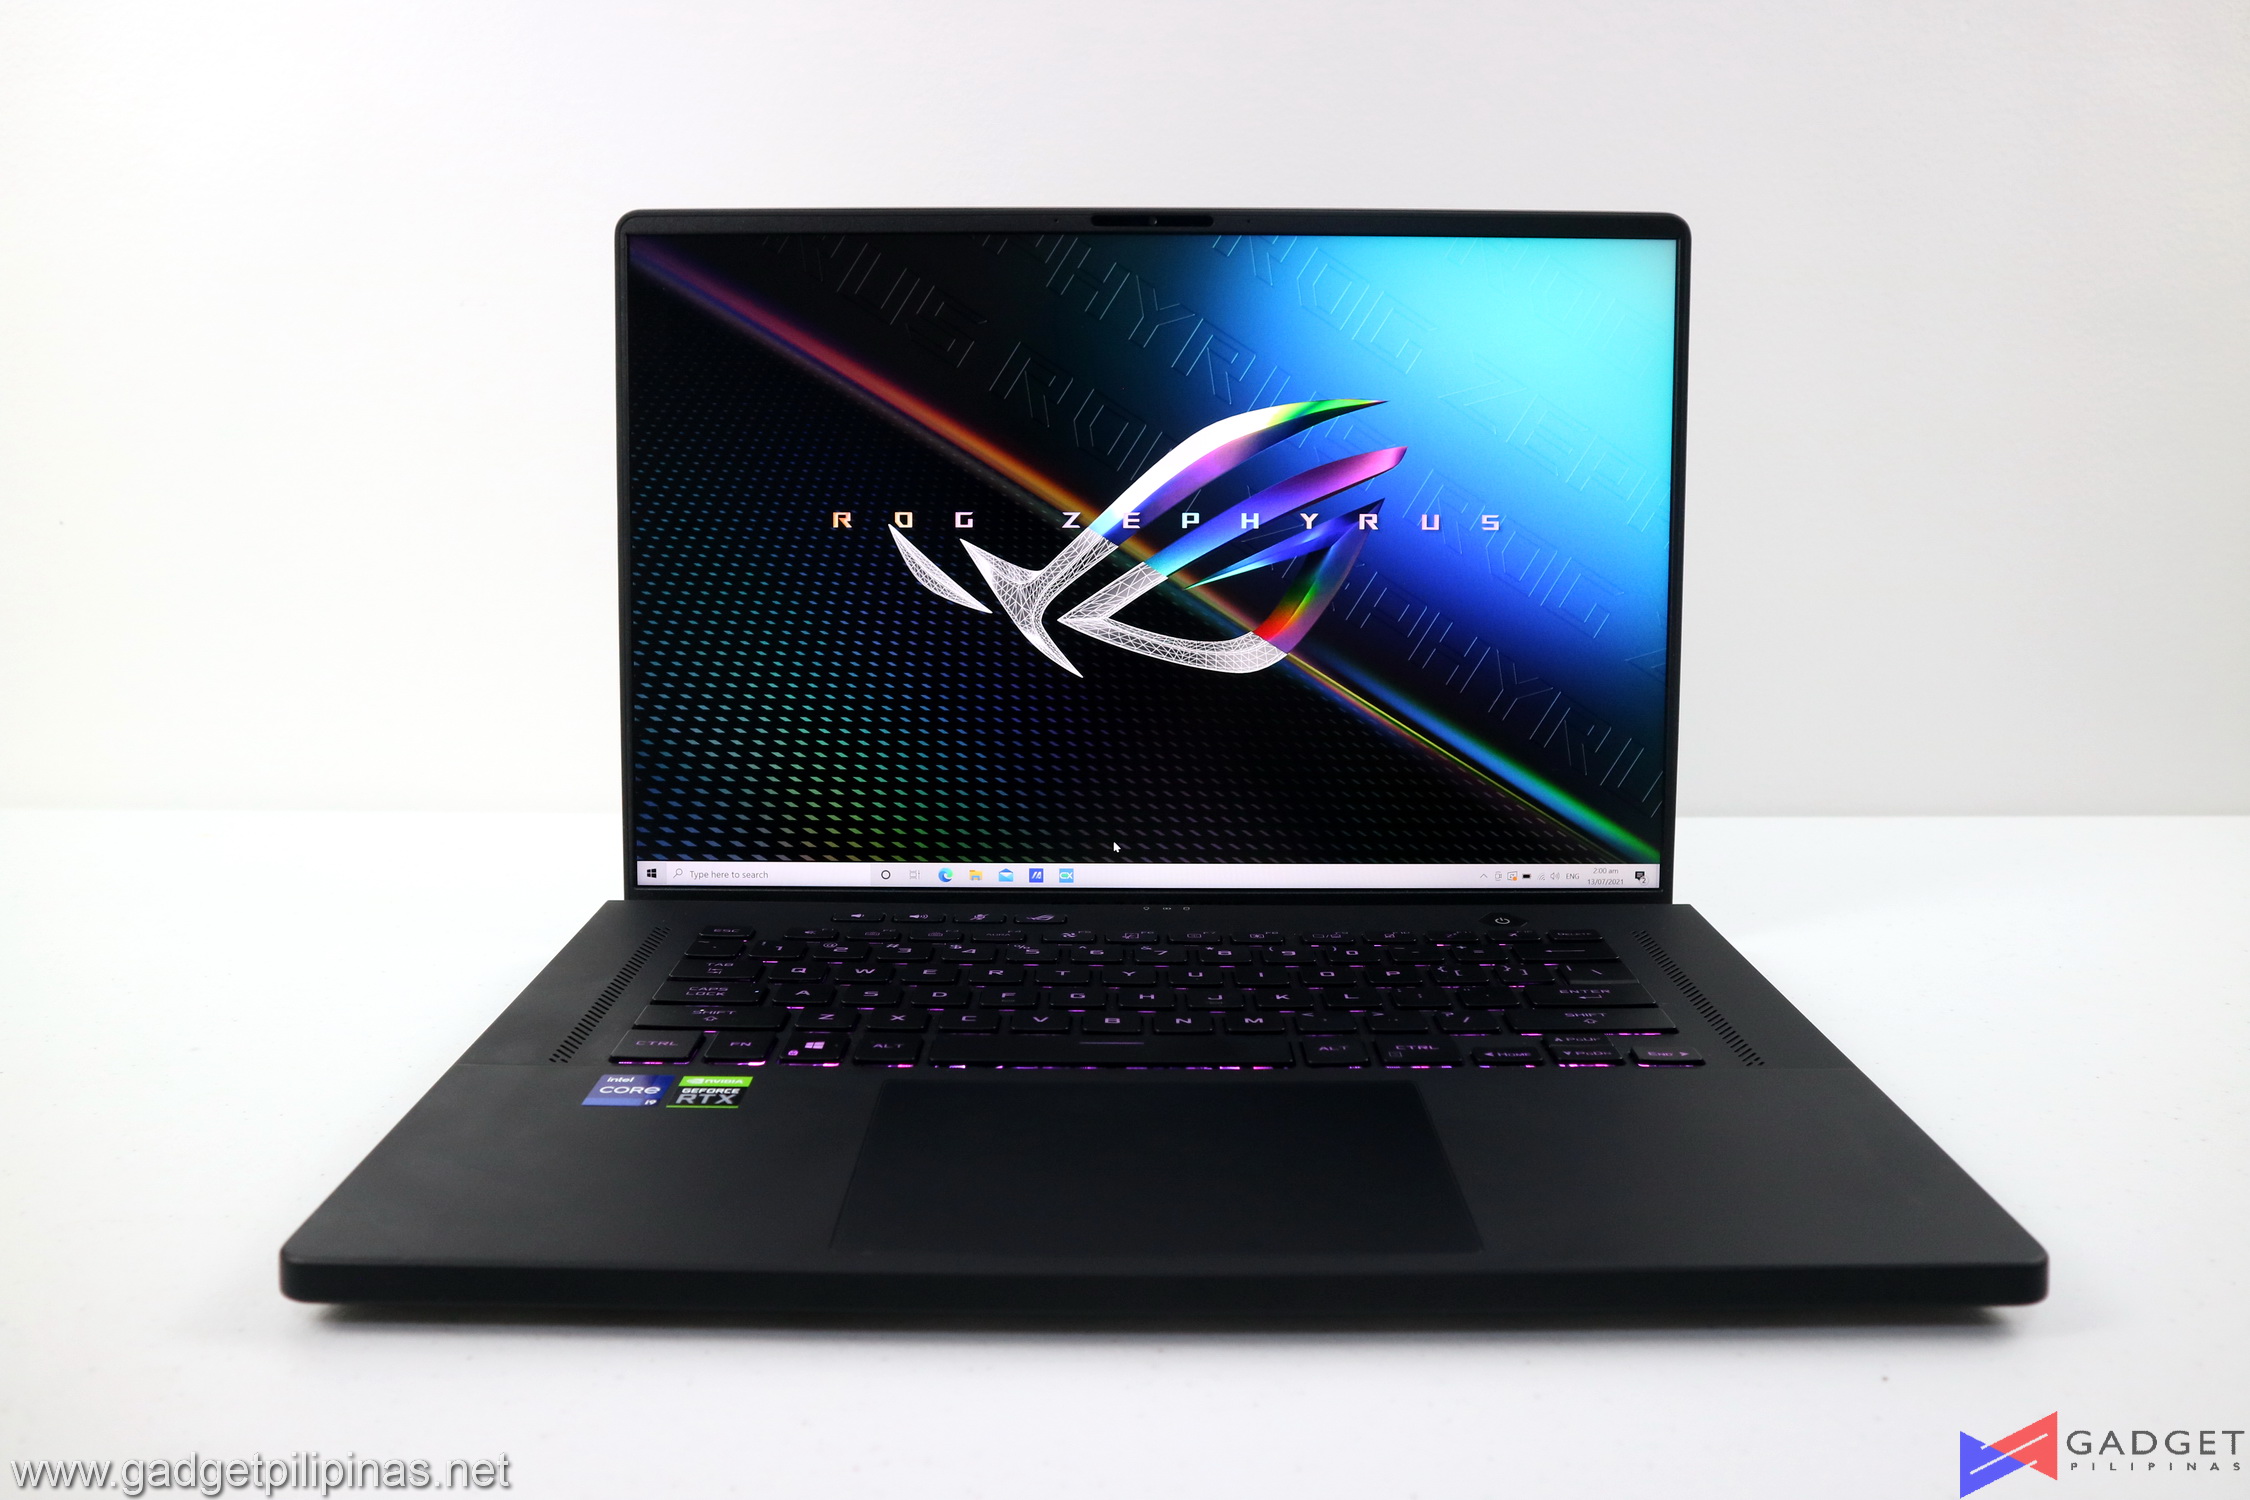 ASUS ROG Zephyrus M16 Gaming Laptop Review – Refined Portability and Performance